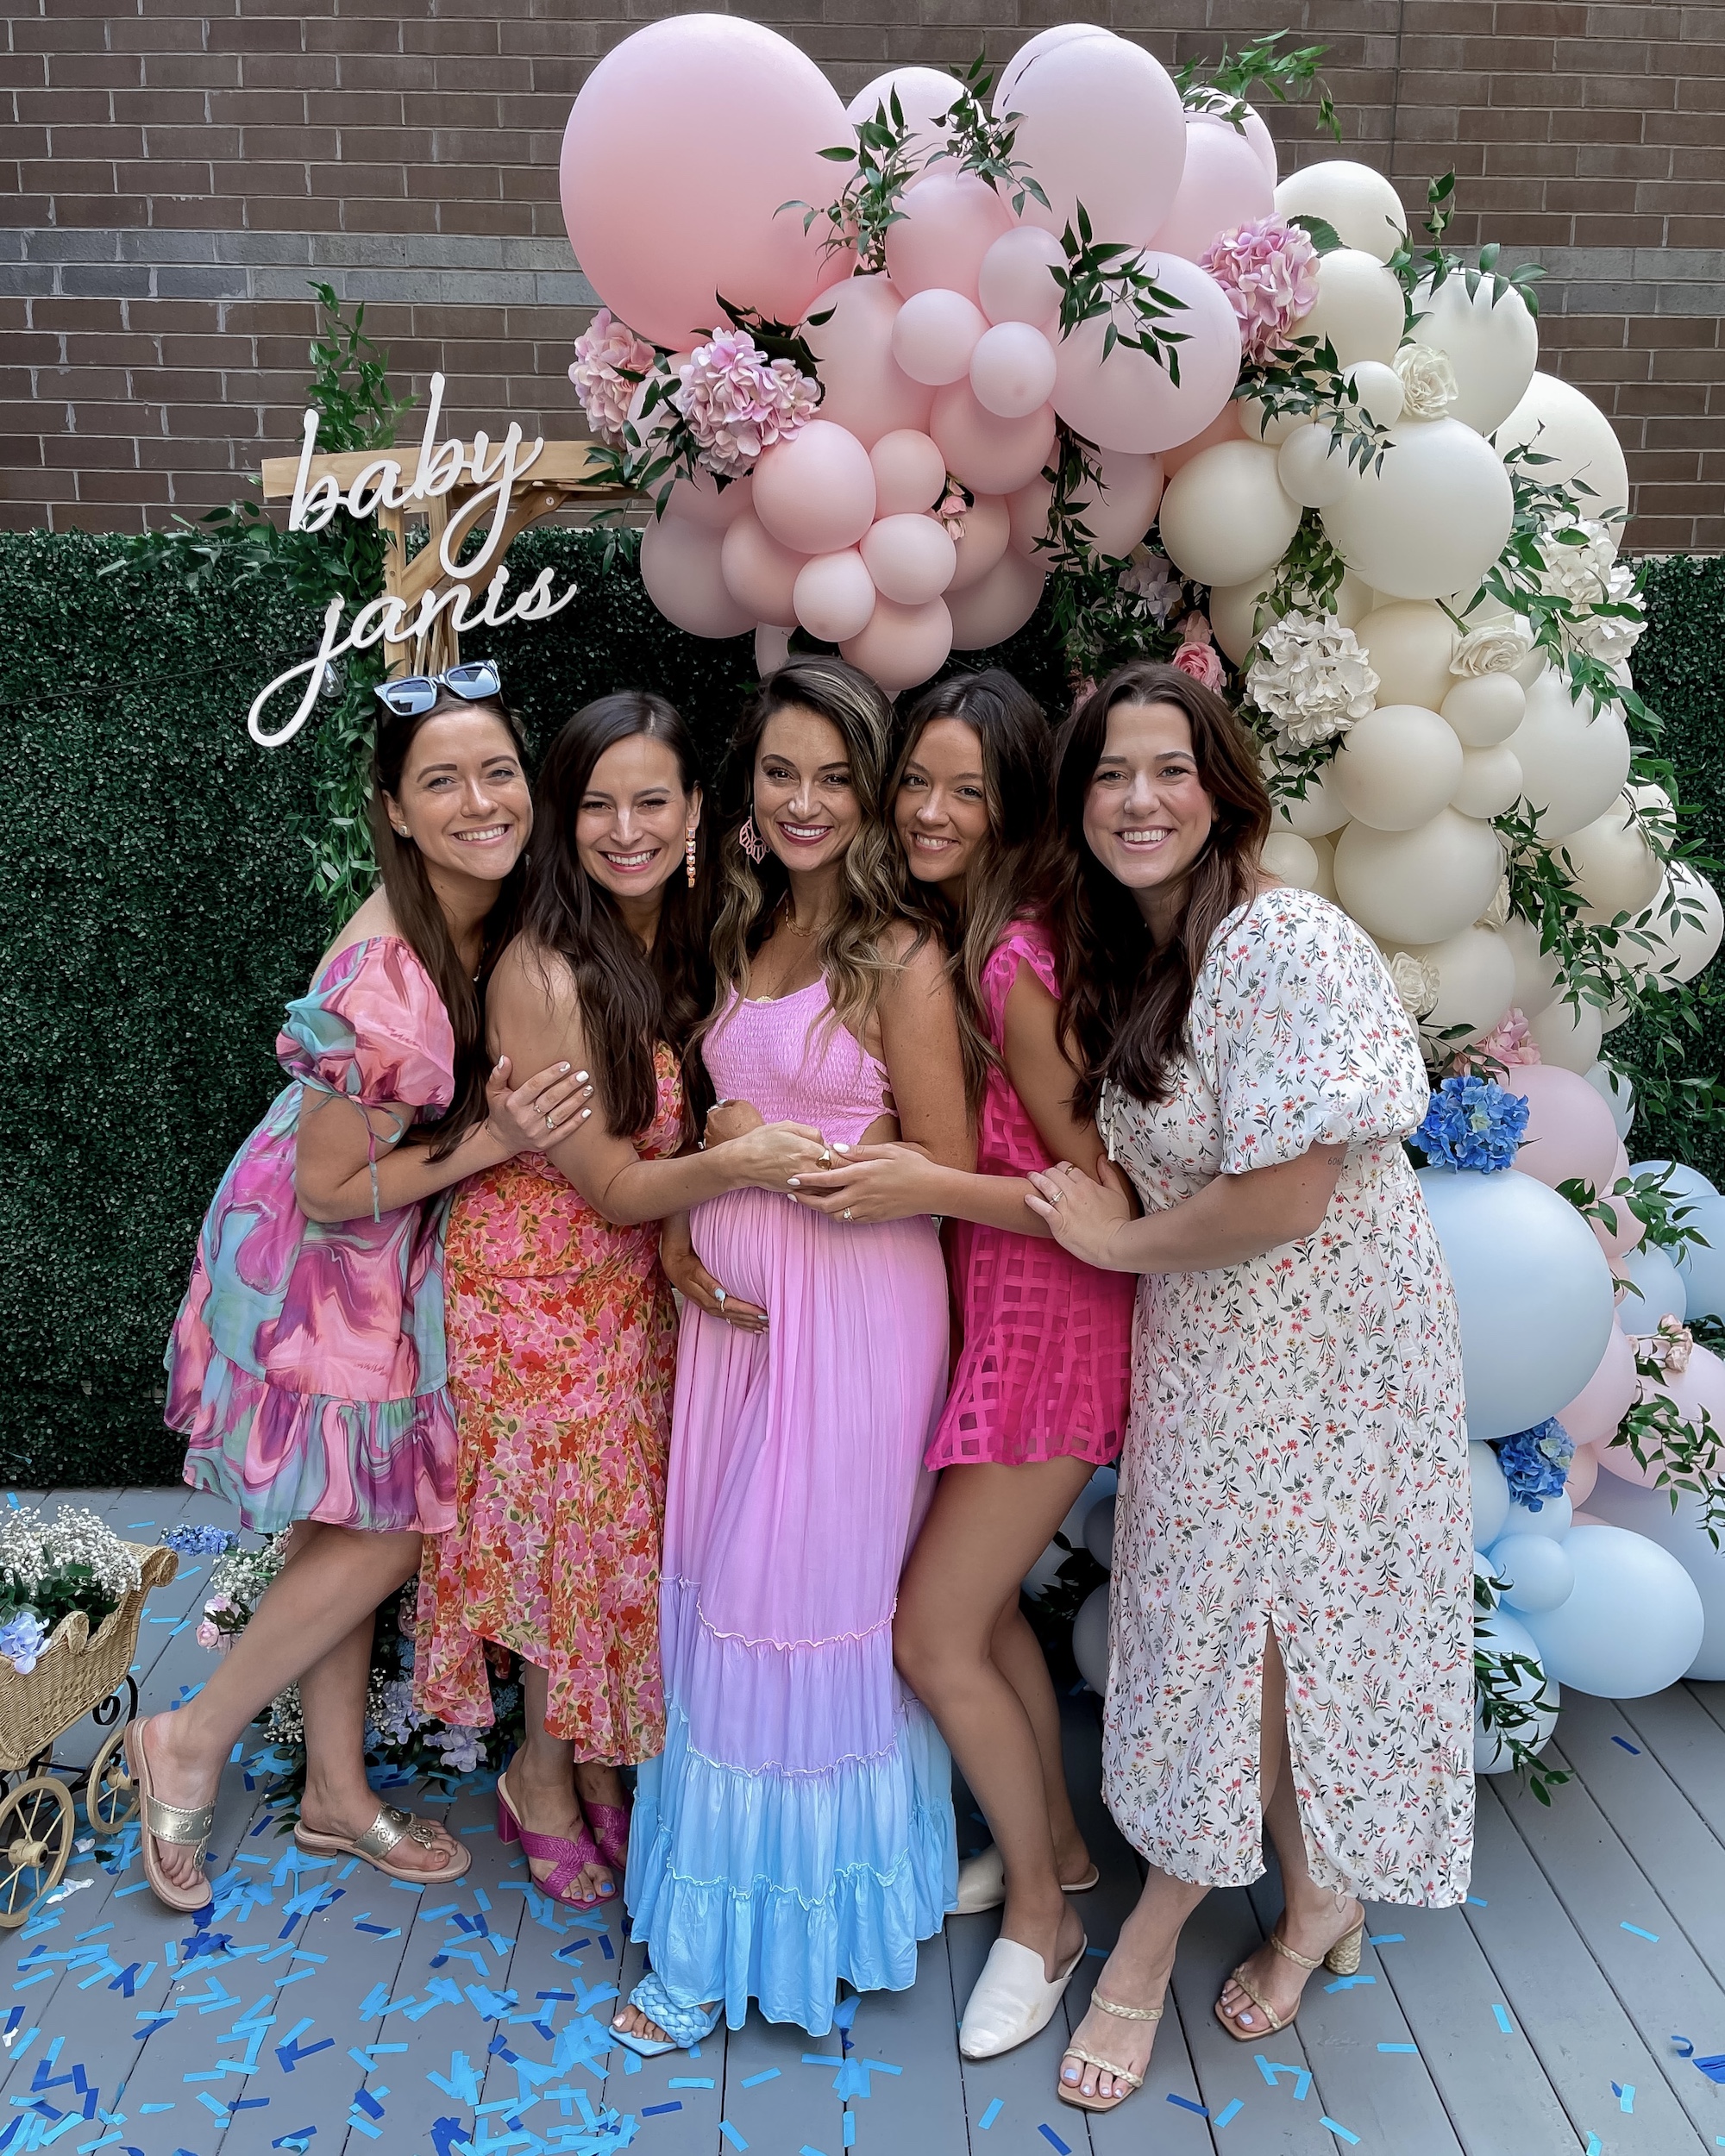 Lexi Janis Gender Reveal It's a Boy May 2023 Instagram Roundup - Bowtiful Life.jpg